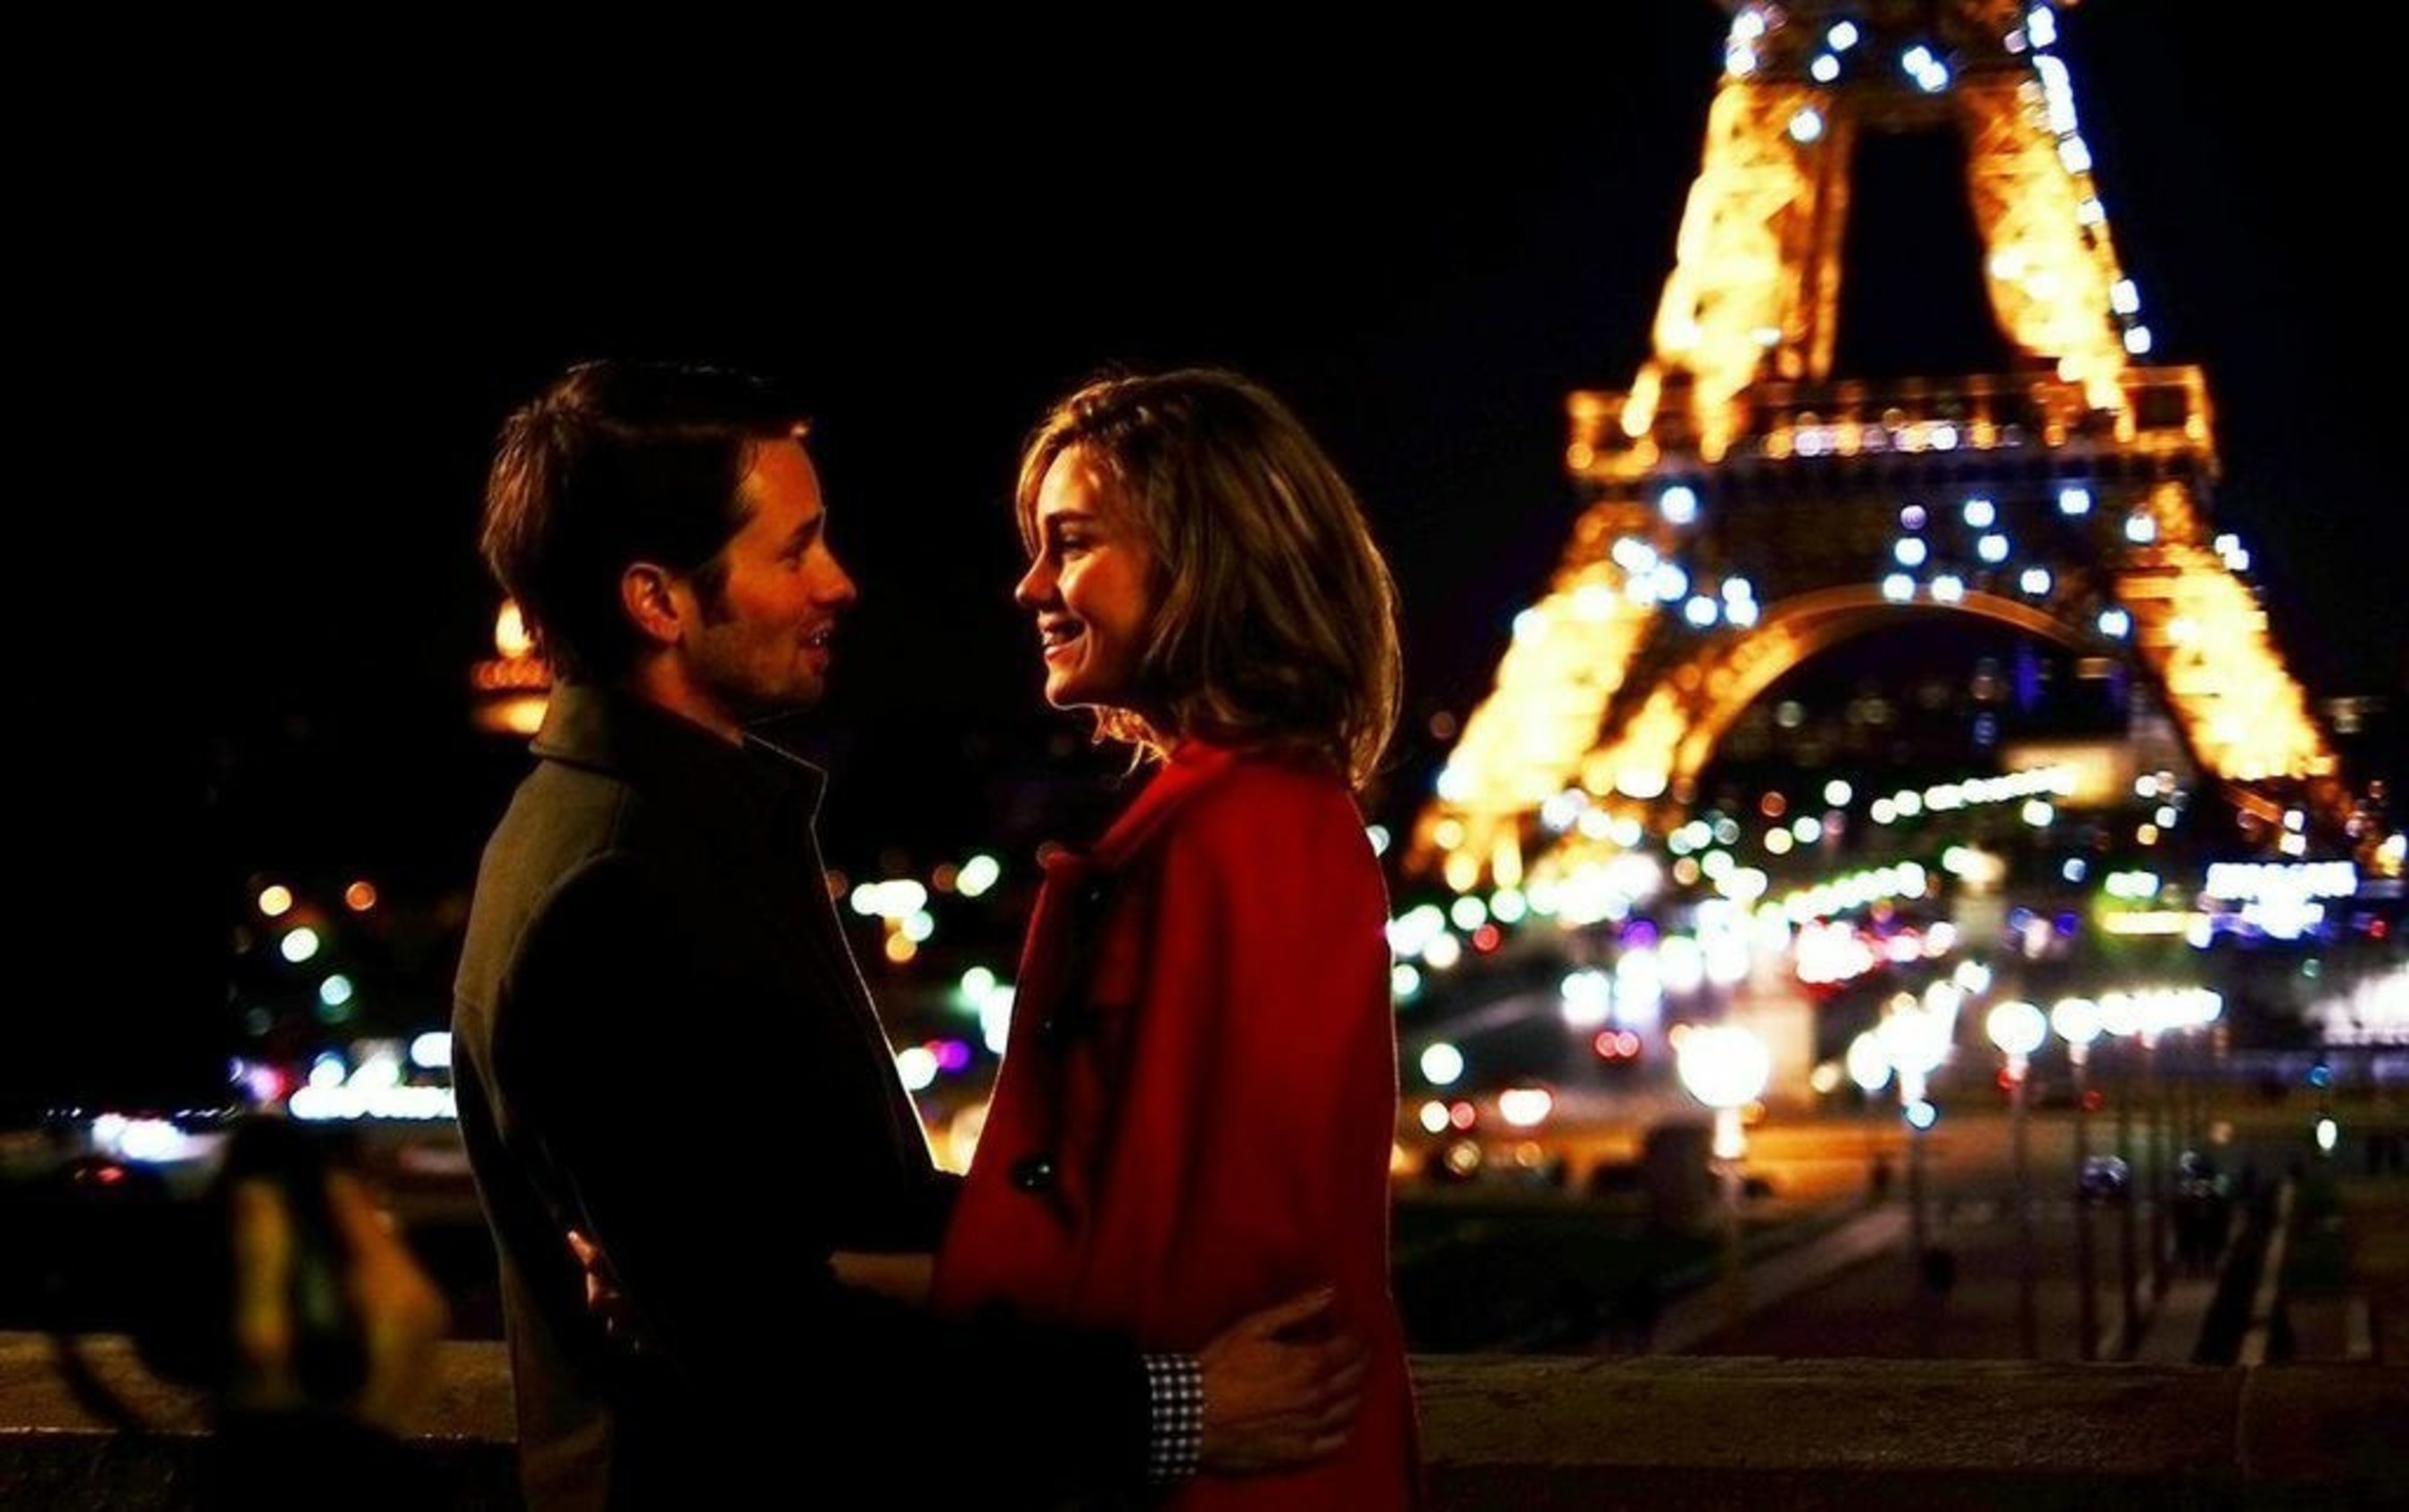 Marriott Hotels Premieres Trailer for the Short Film - French Kiss - Starring Tyler Ritter - Shot in Paris, Film Marks Second Original Film Production from the Marriott Content Studio